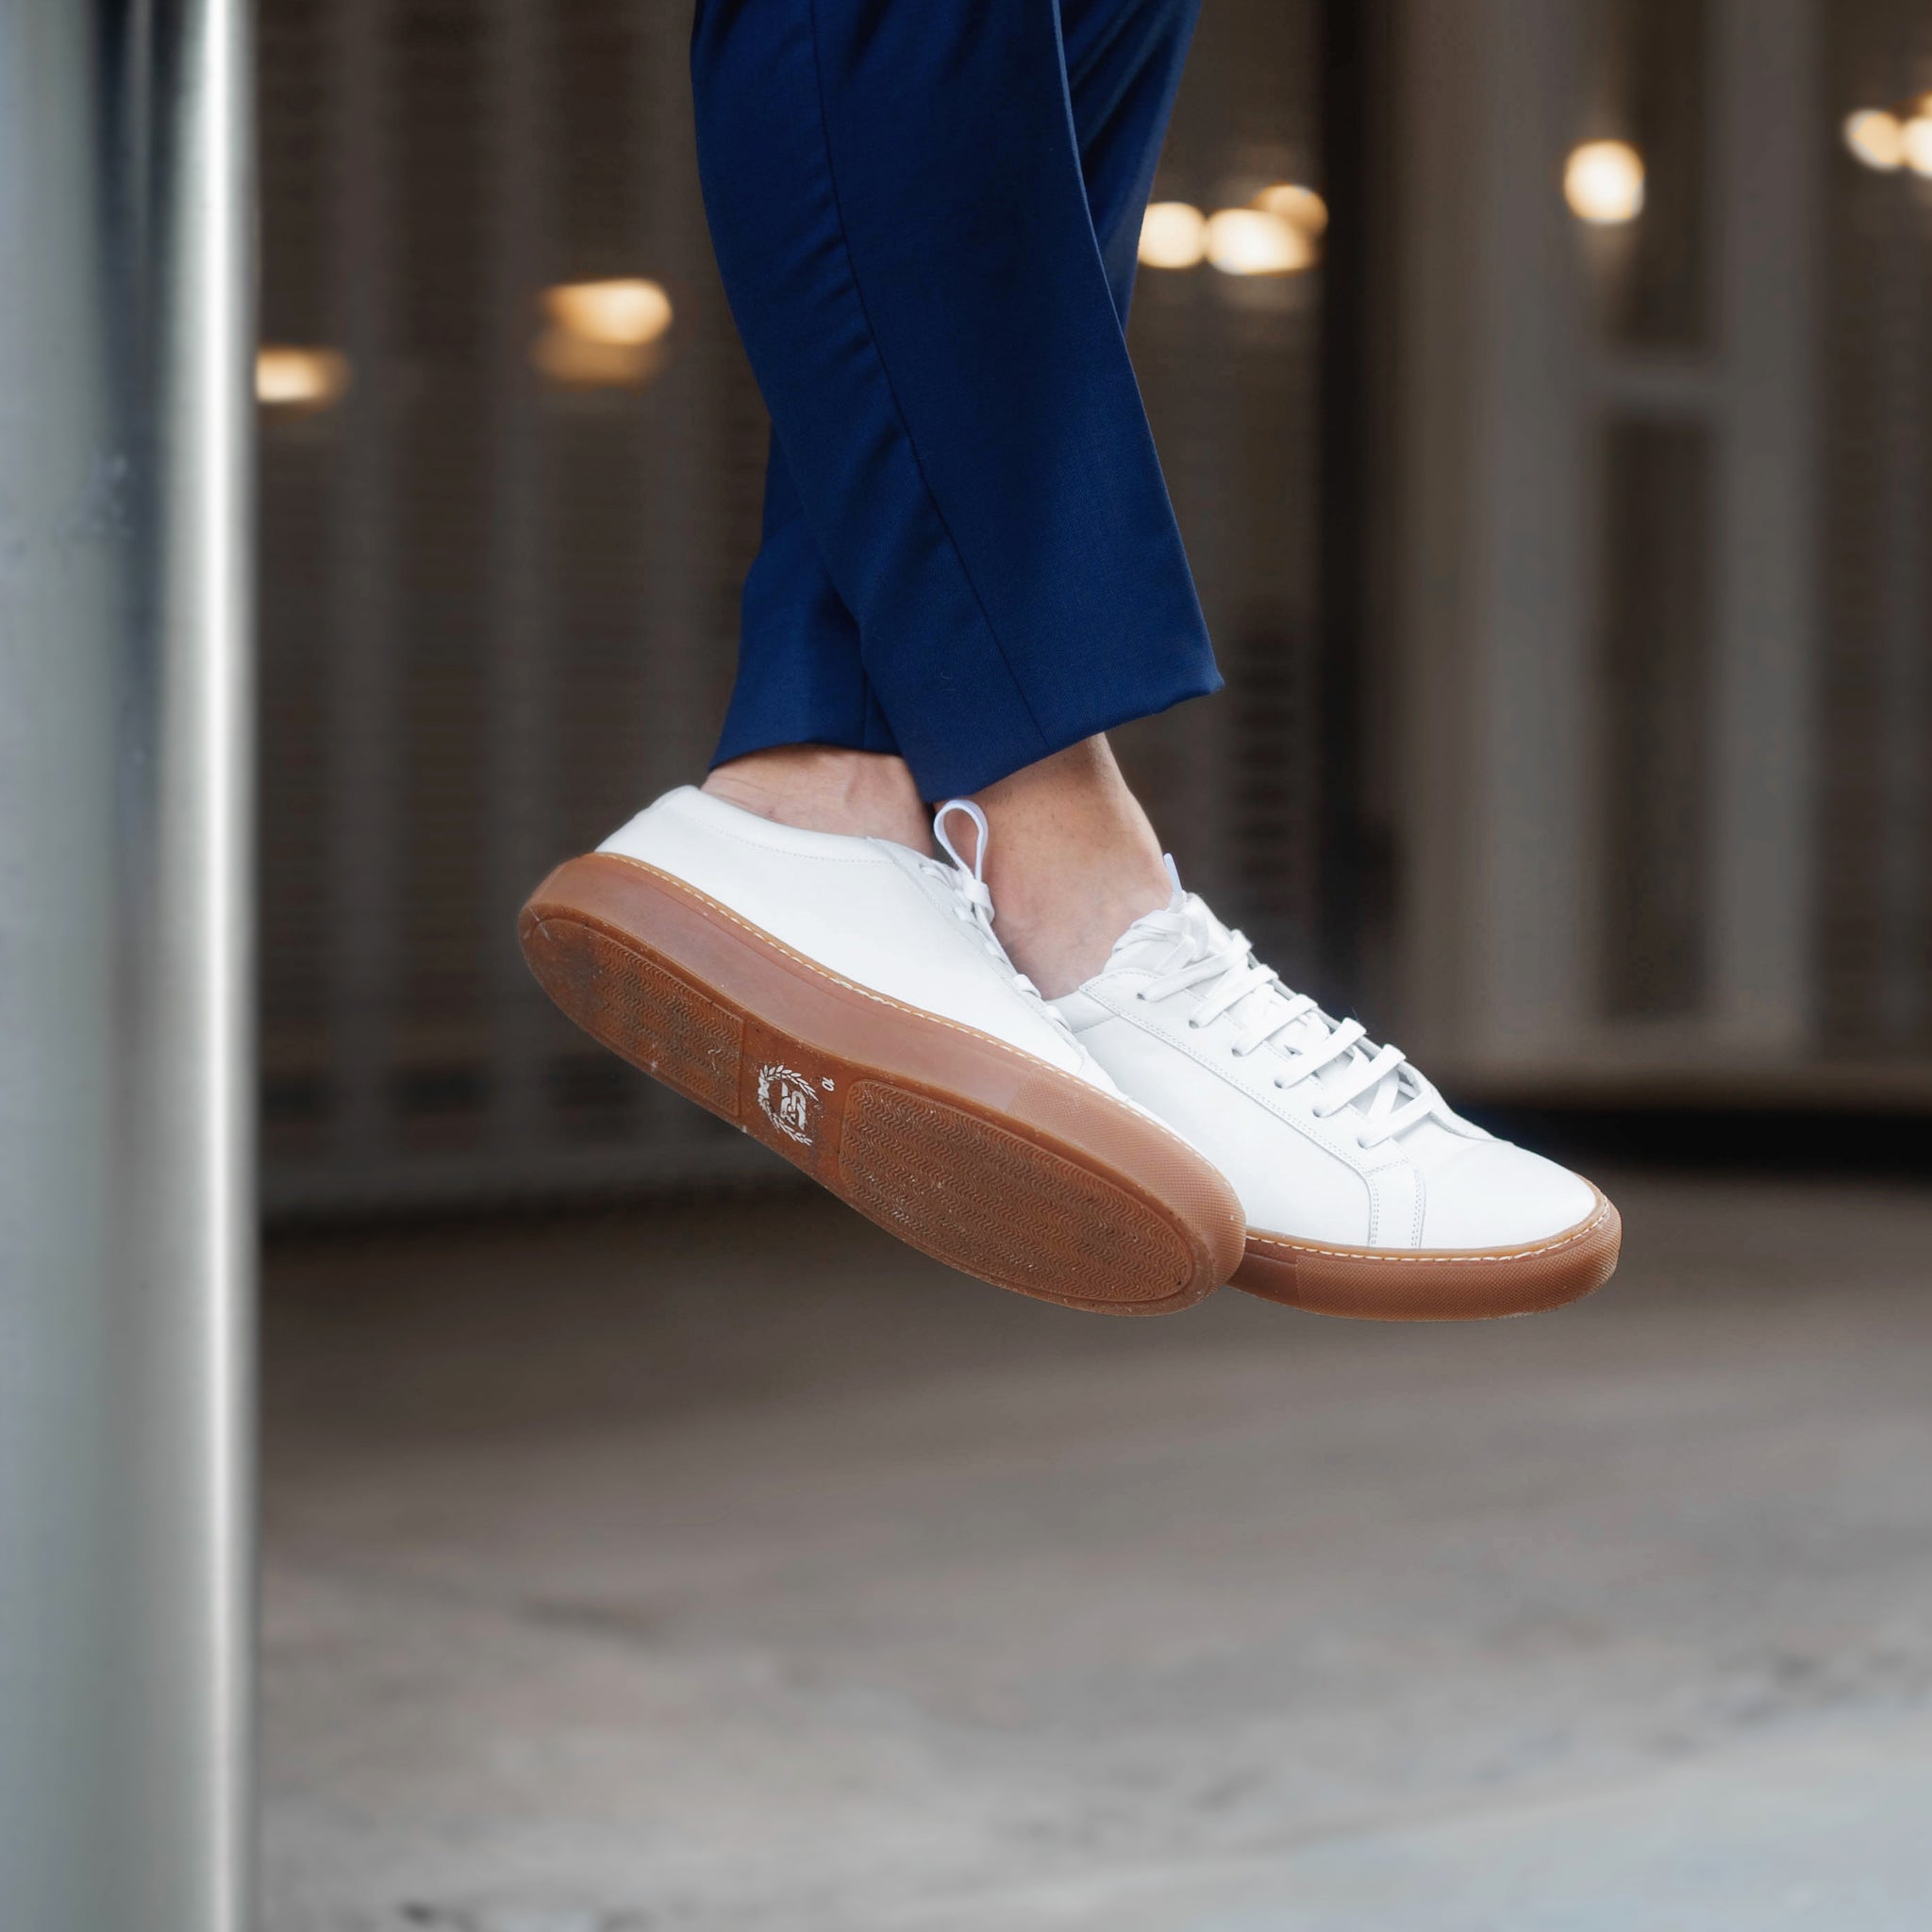 Southern Gents Classic Sneaker - White + Gum